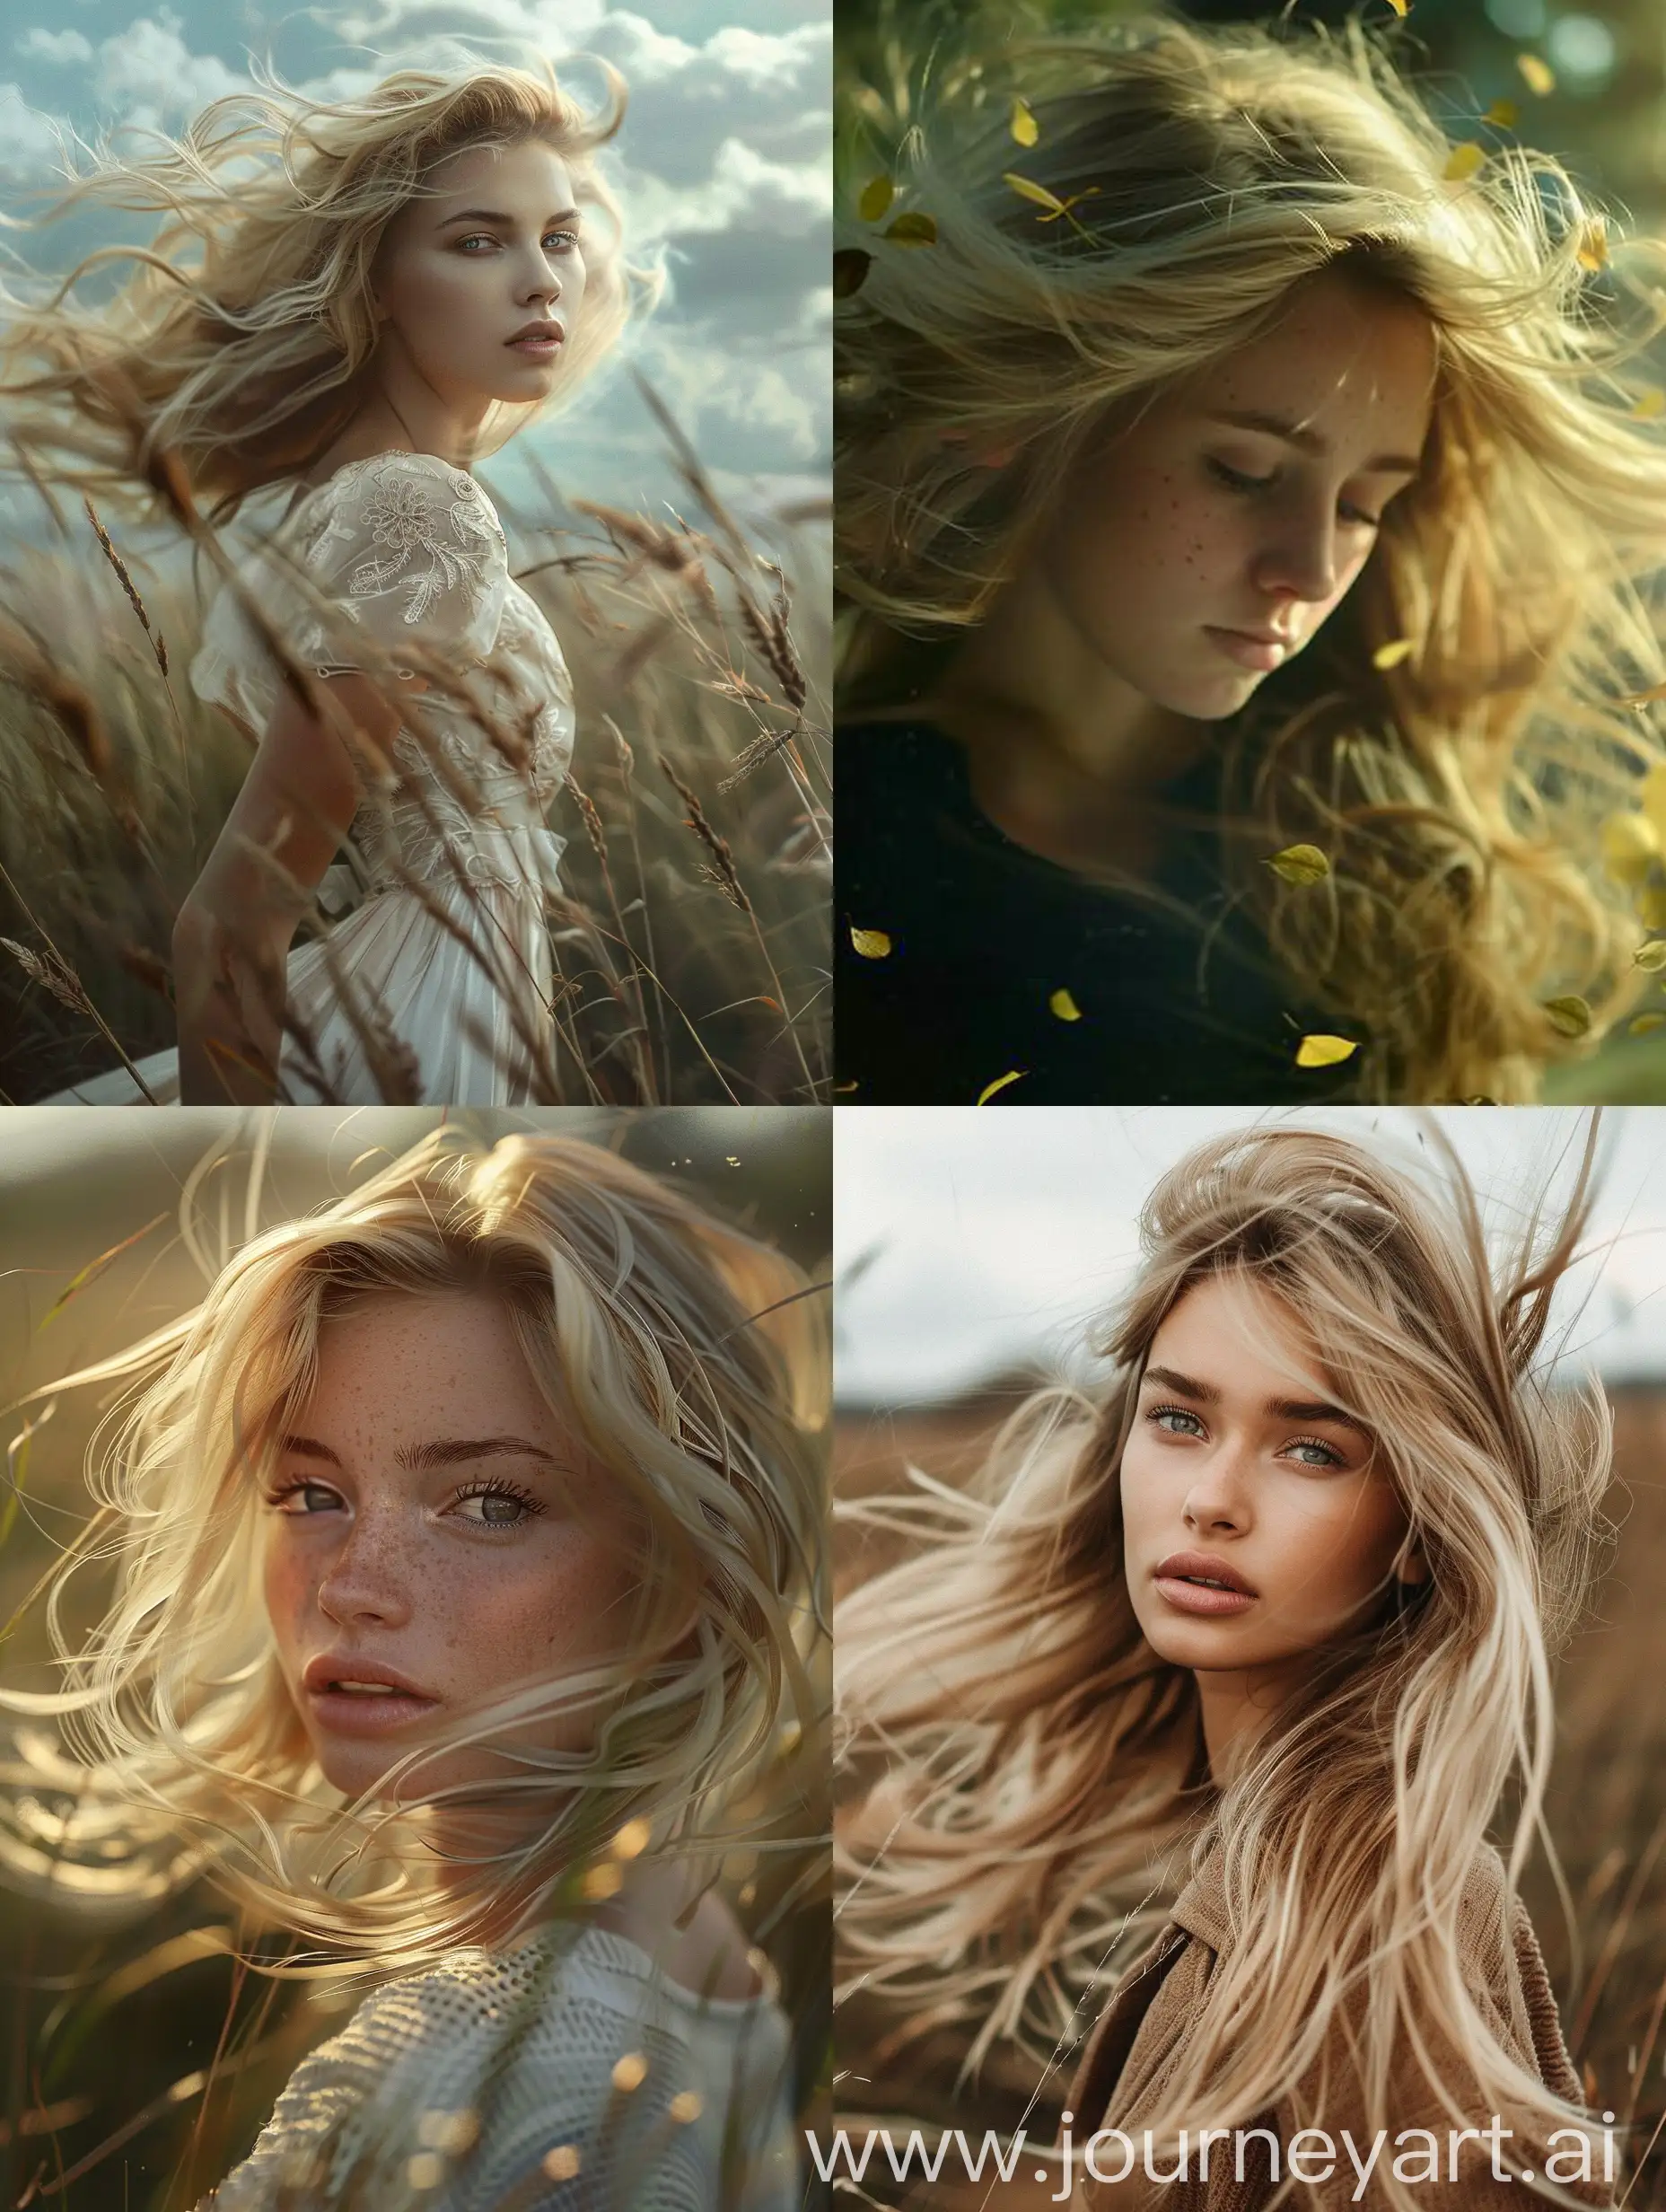 Blonde-Woman-with-Hair-Blowing-in-the-Wind-in-Nature